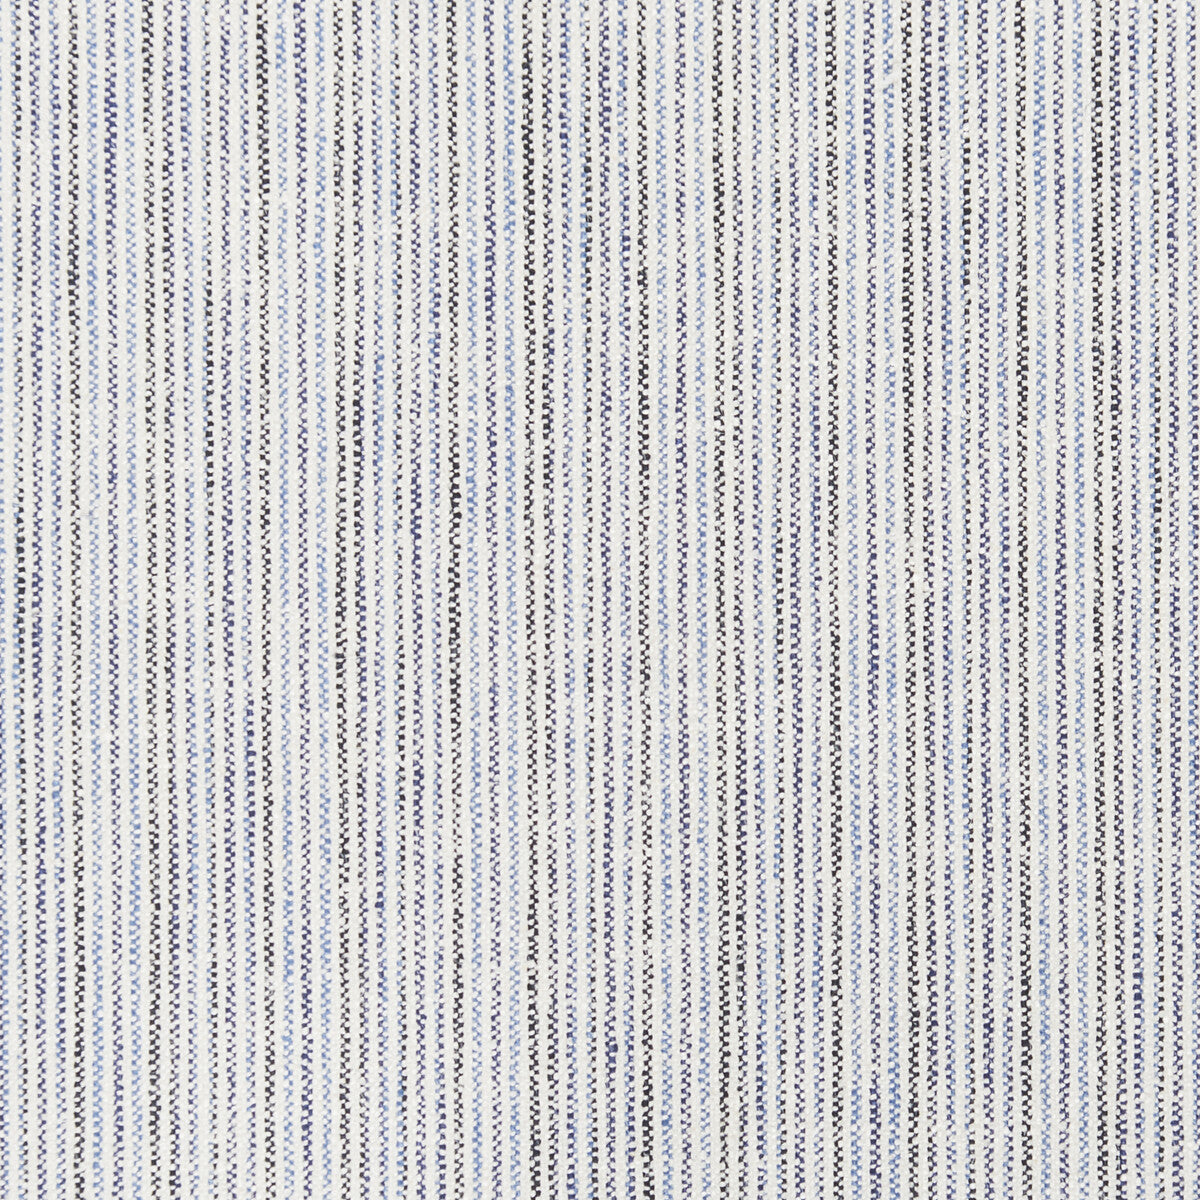 Kravet Basics fabric in 37263-51 color - pattern 37263.51.0 - by Kravet Basics in the Bungalow Chic II collection